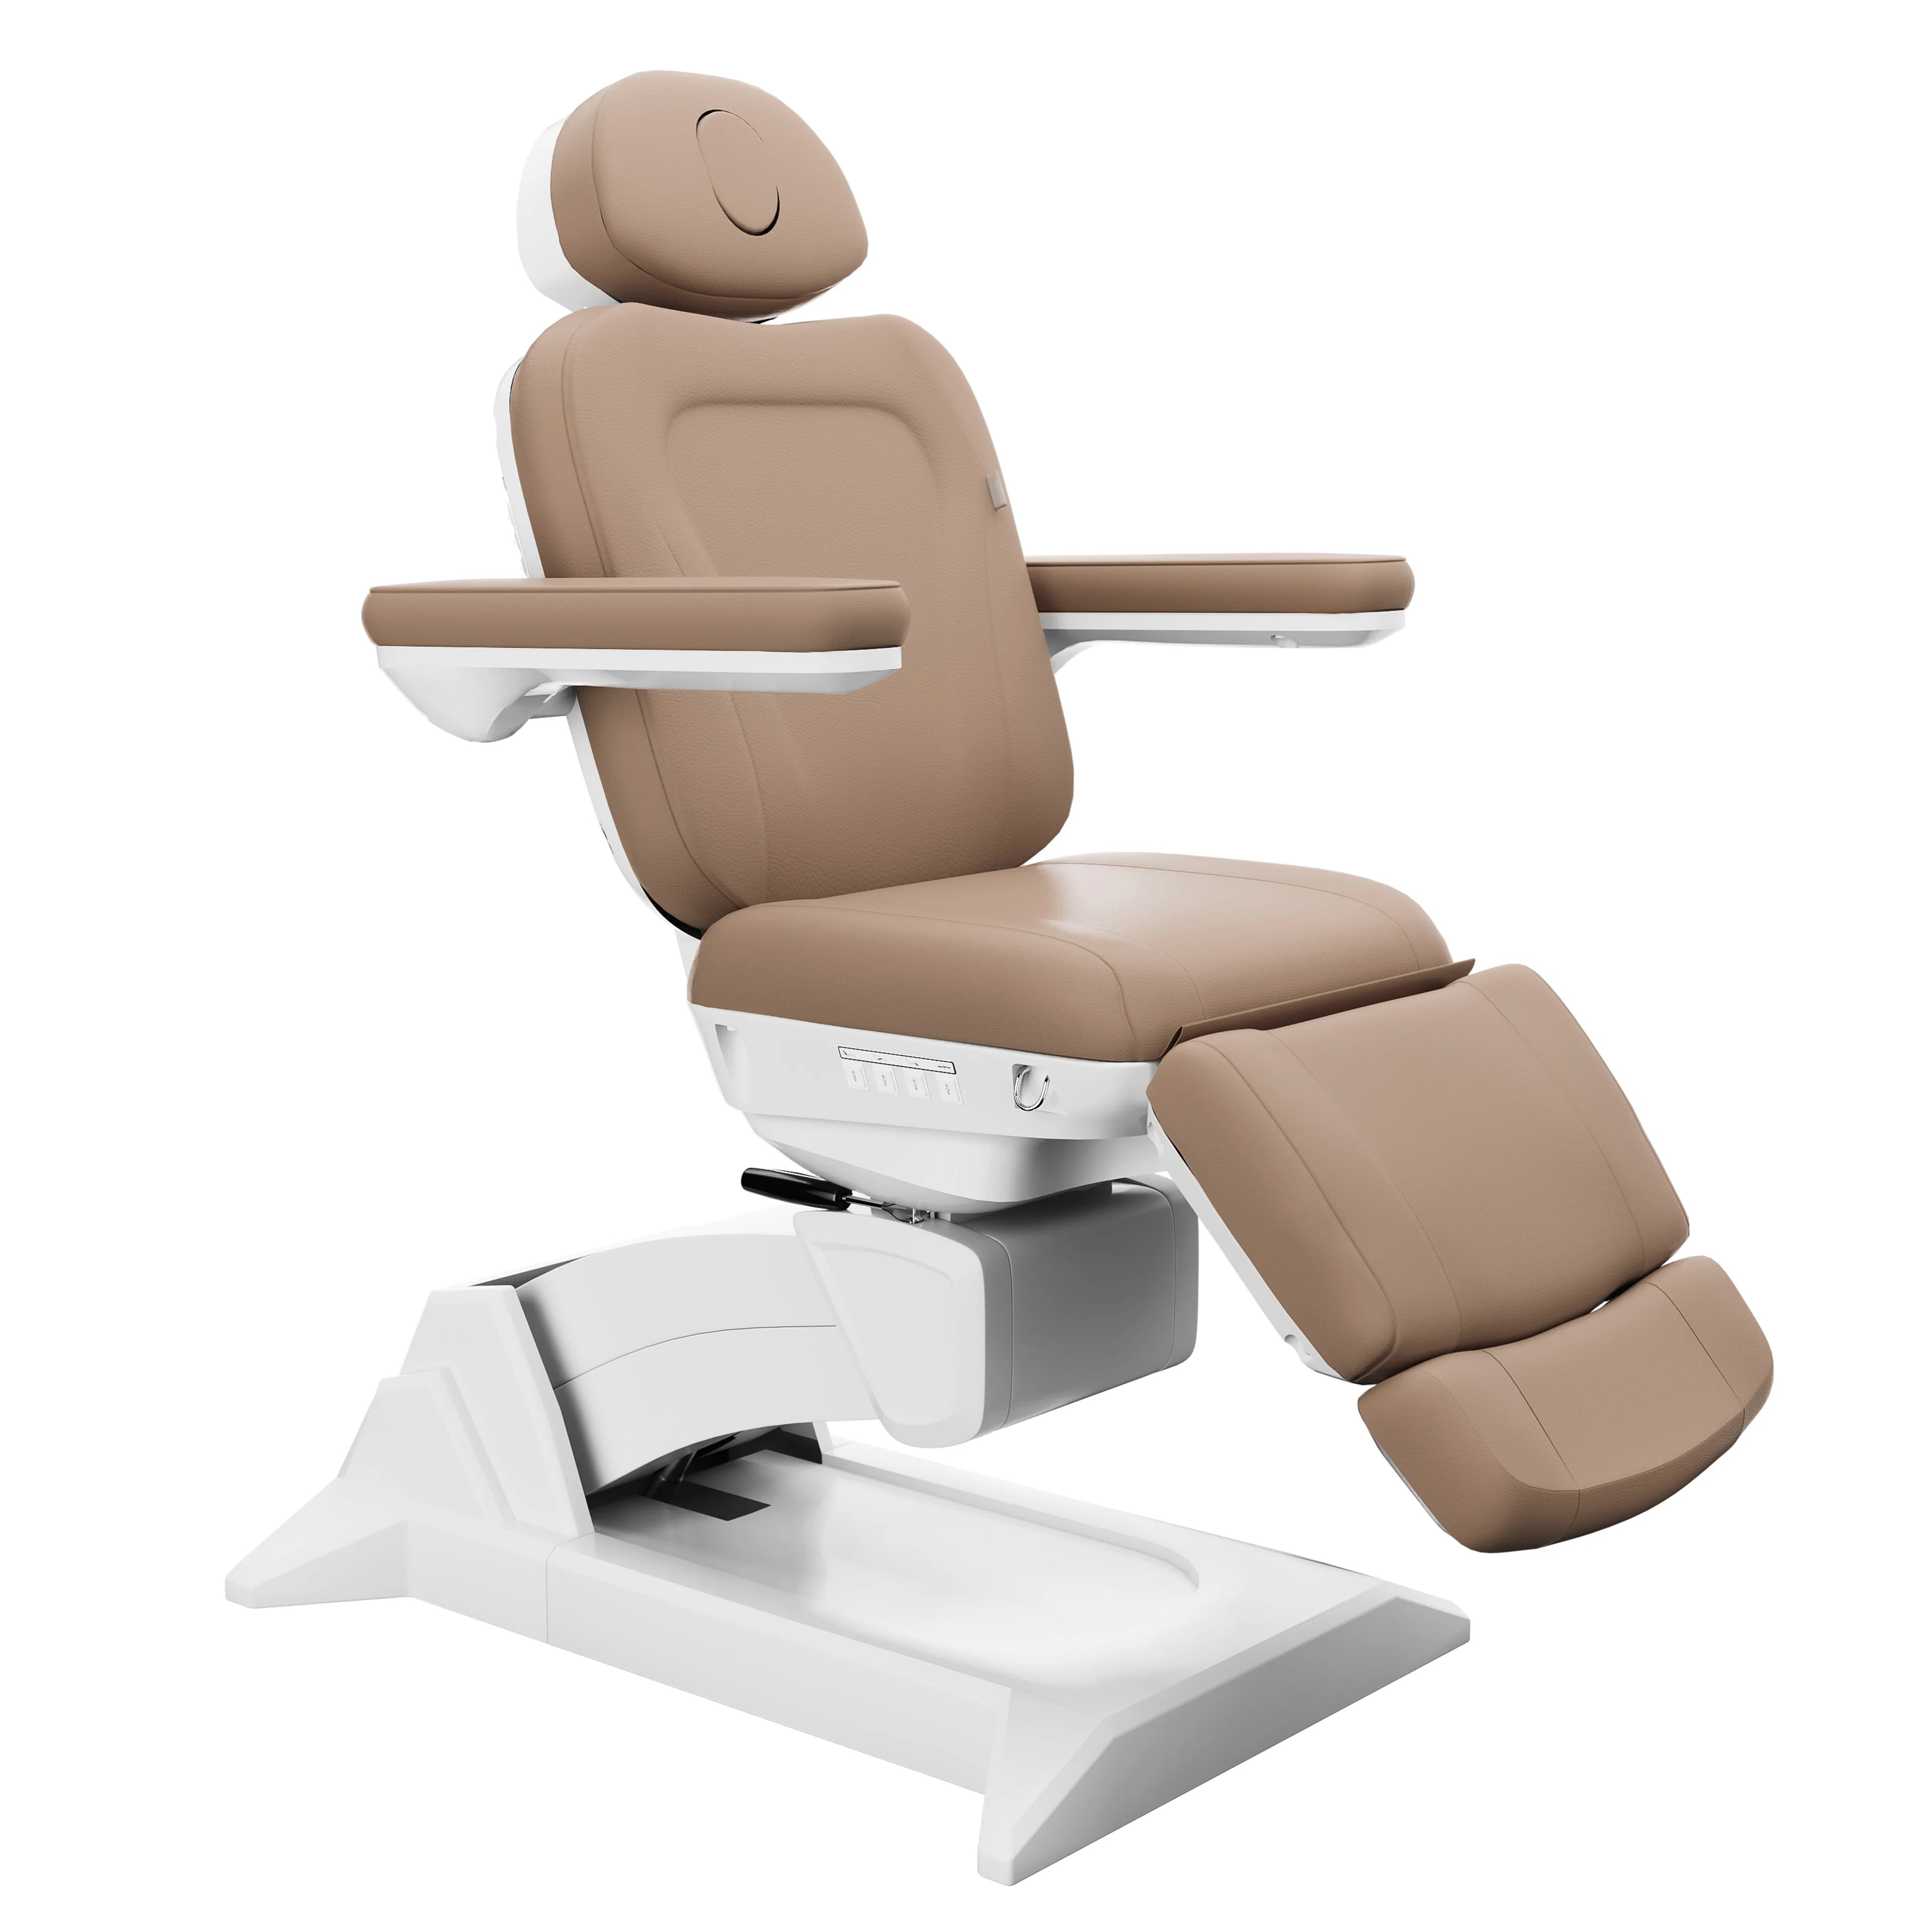 SpaMarc . Ultera (Brown) . Rotating . 4 Motor Spa Treatment Chair/Bed